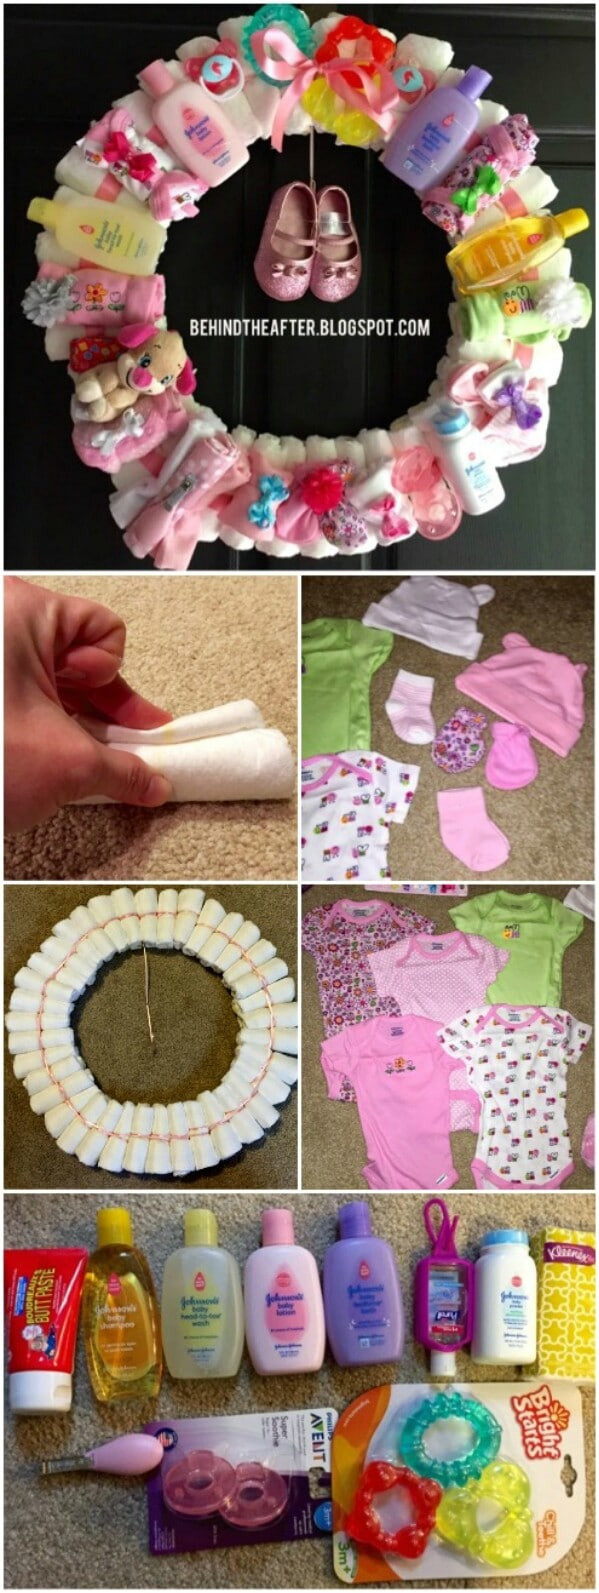 Baby Bath Gift Ideas
 25 Enchantingly Adorable Baby Shower Gift Ideas That Will